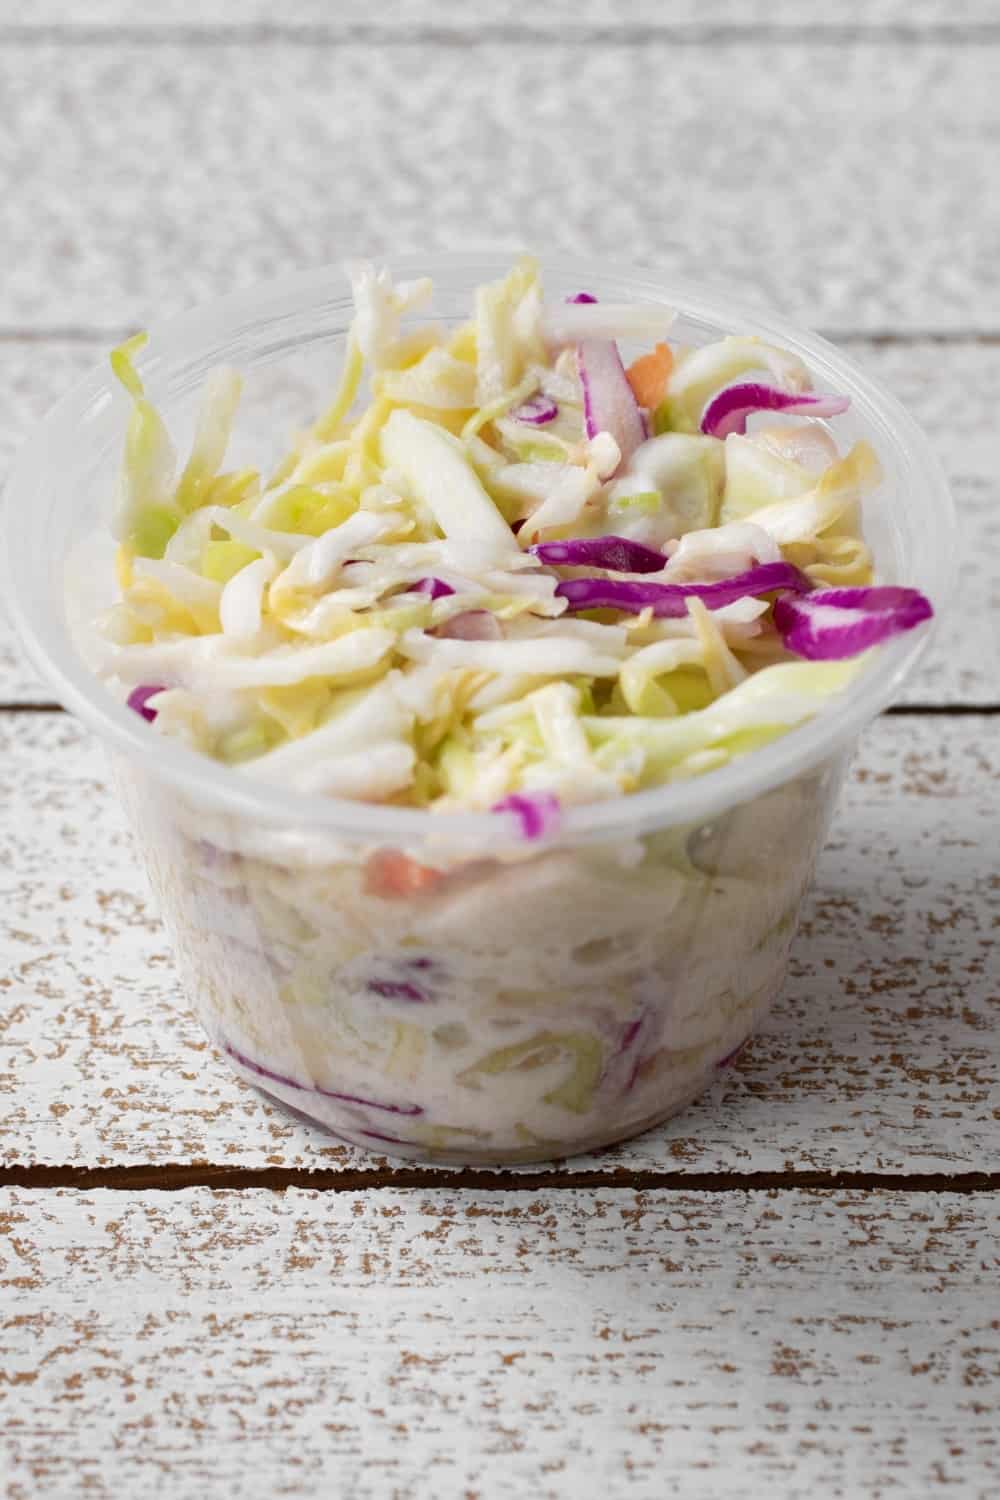 A view of a small plastic condiment cup of cole slaw.